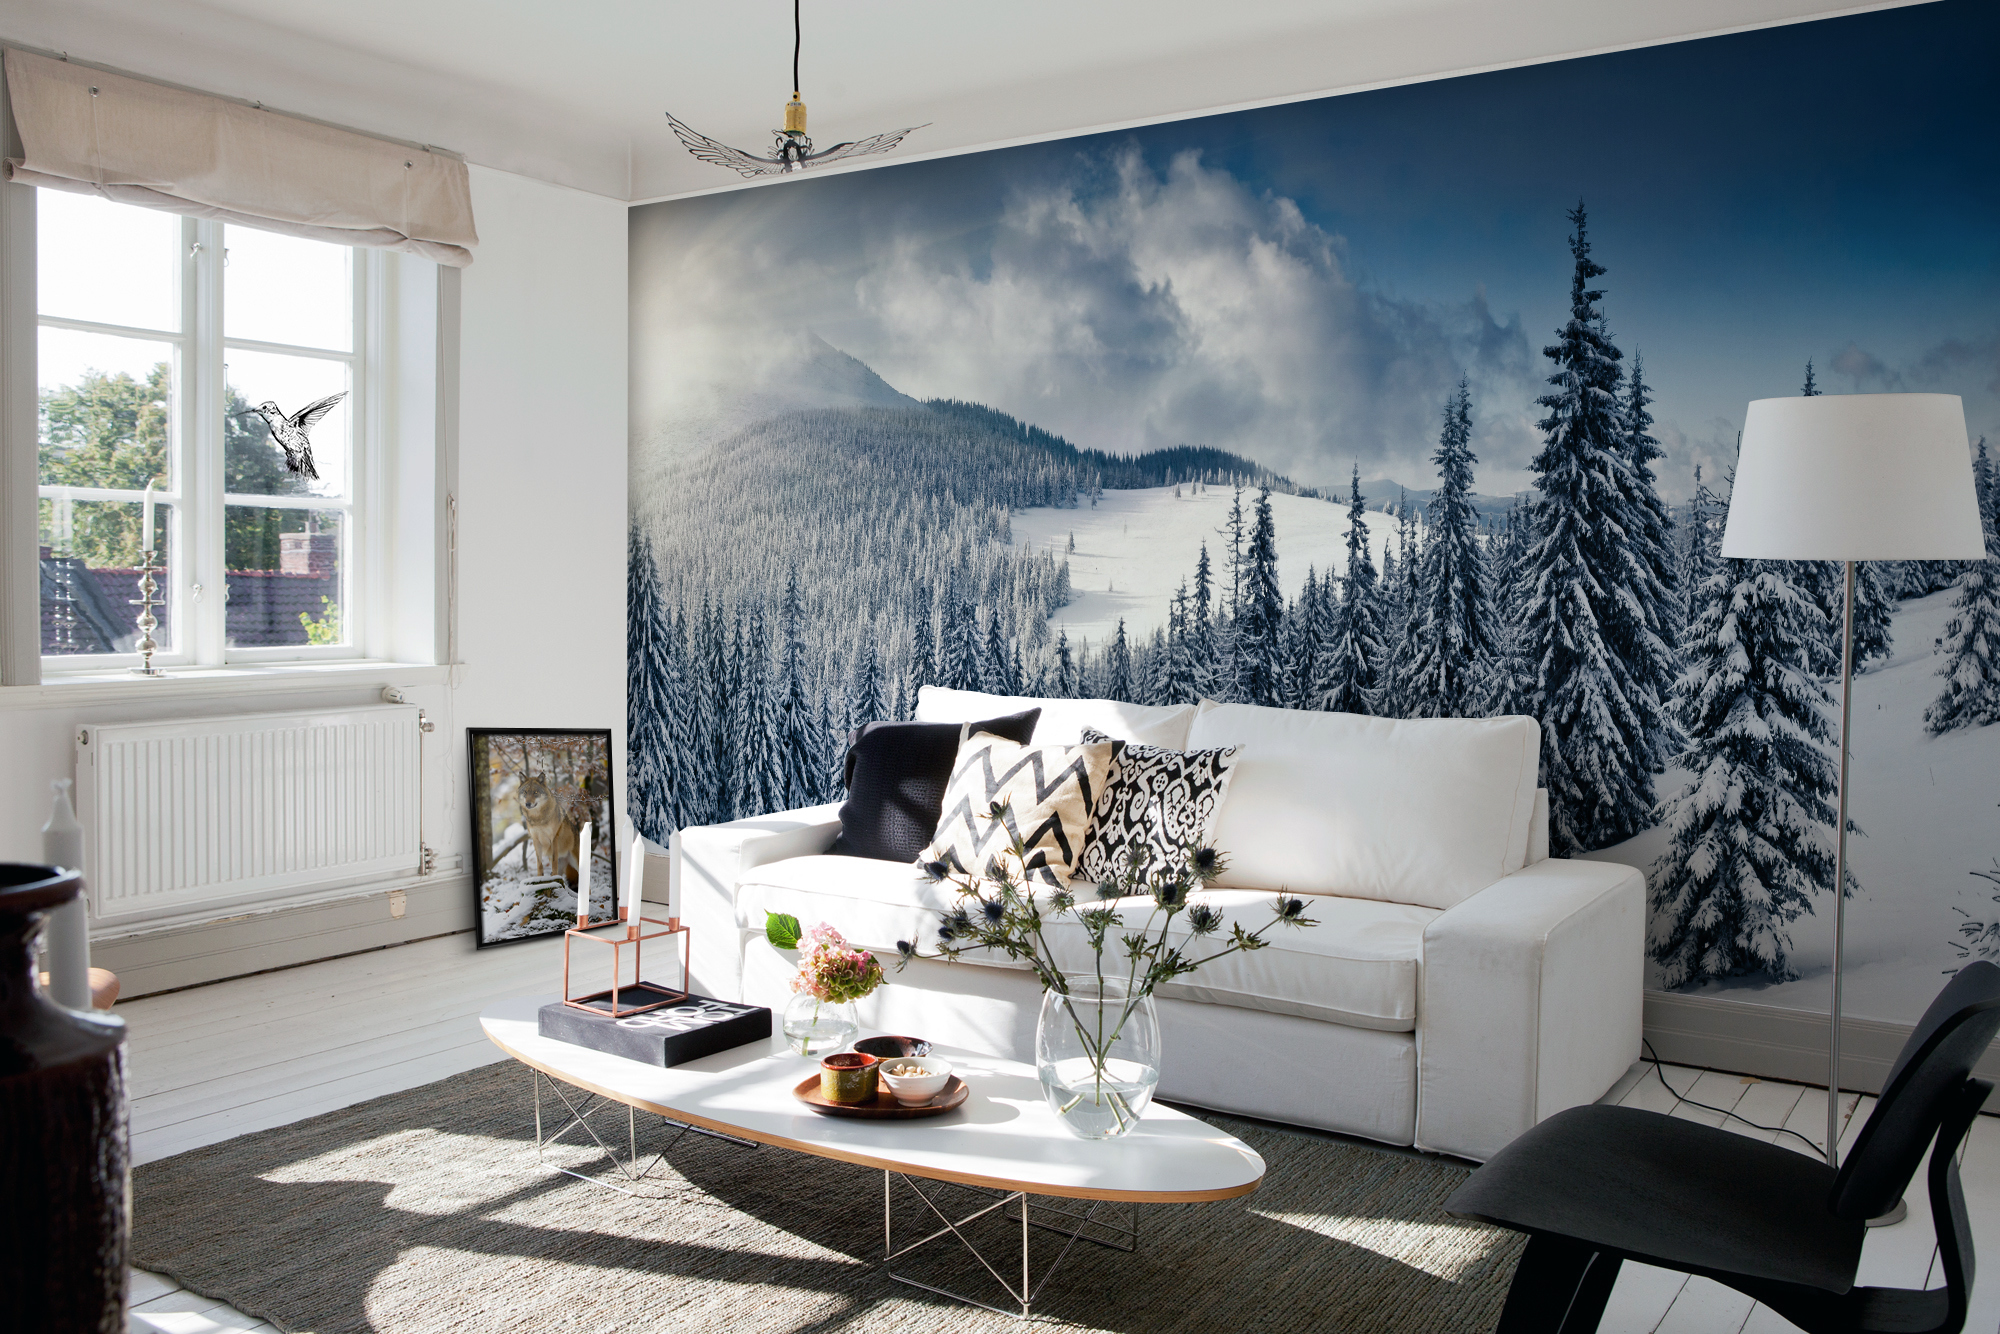 Just Relax • Living room - Scandinavian - Wall Murals - Posters - Stickers - Animals - Landscapes